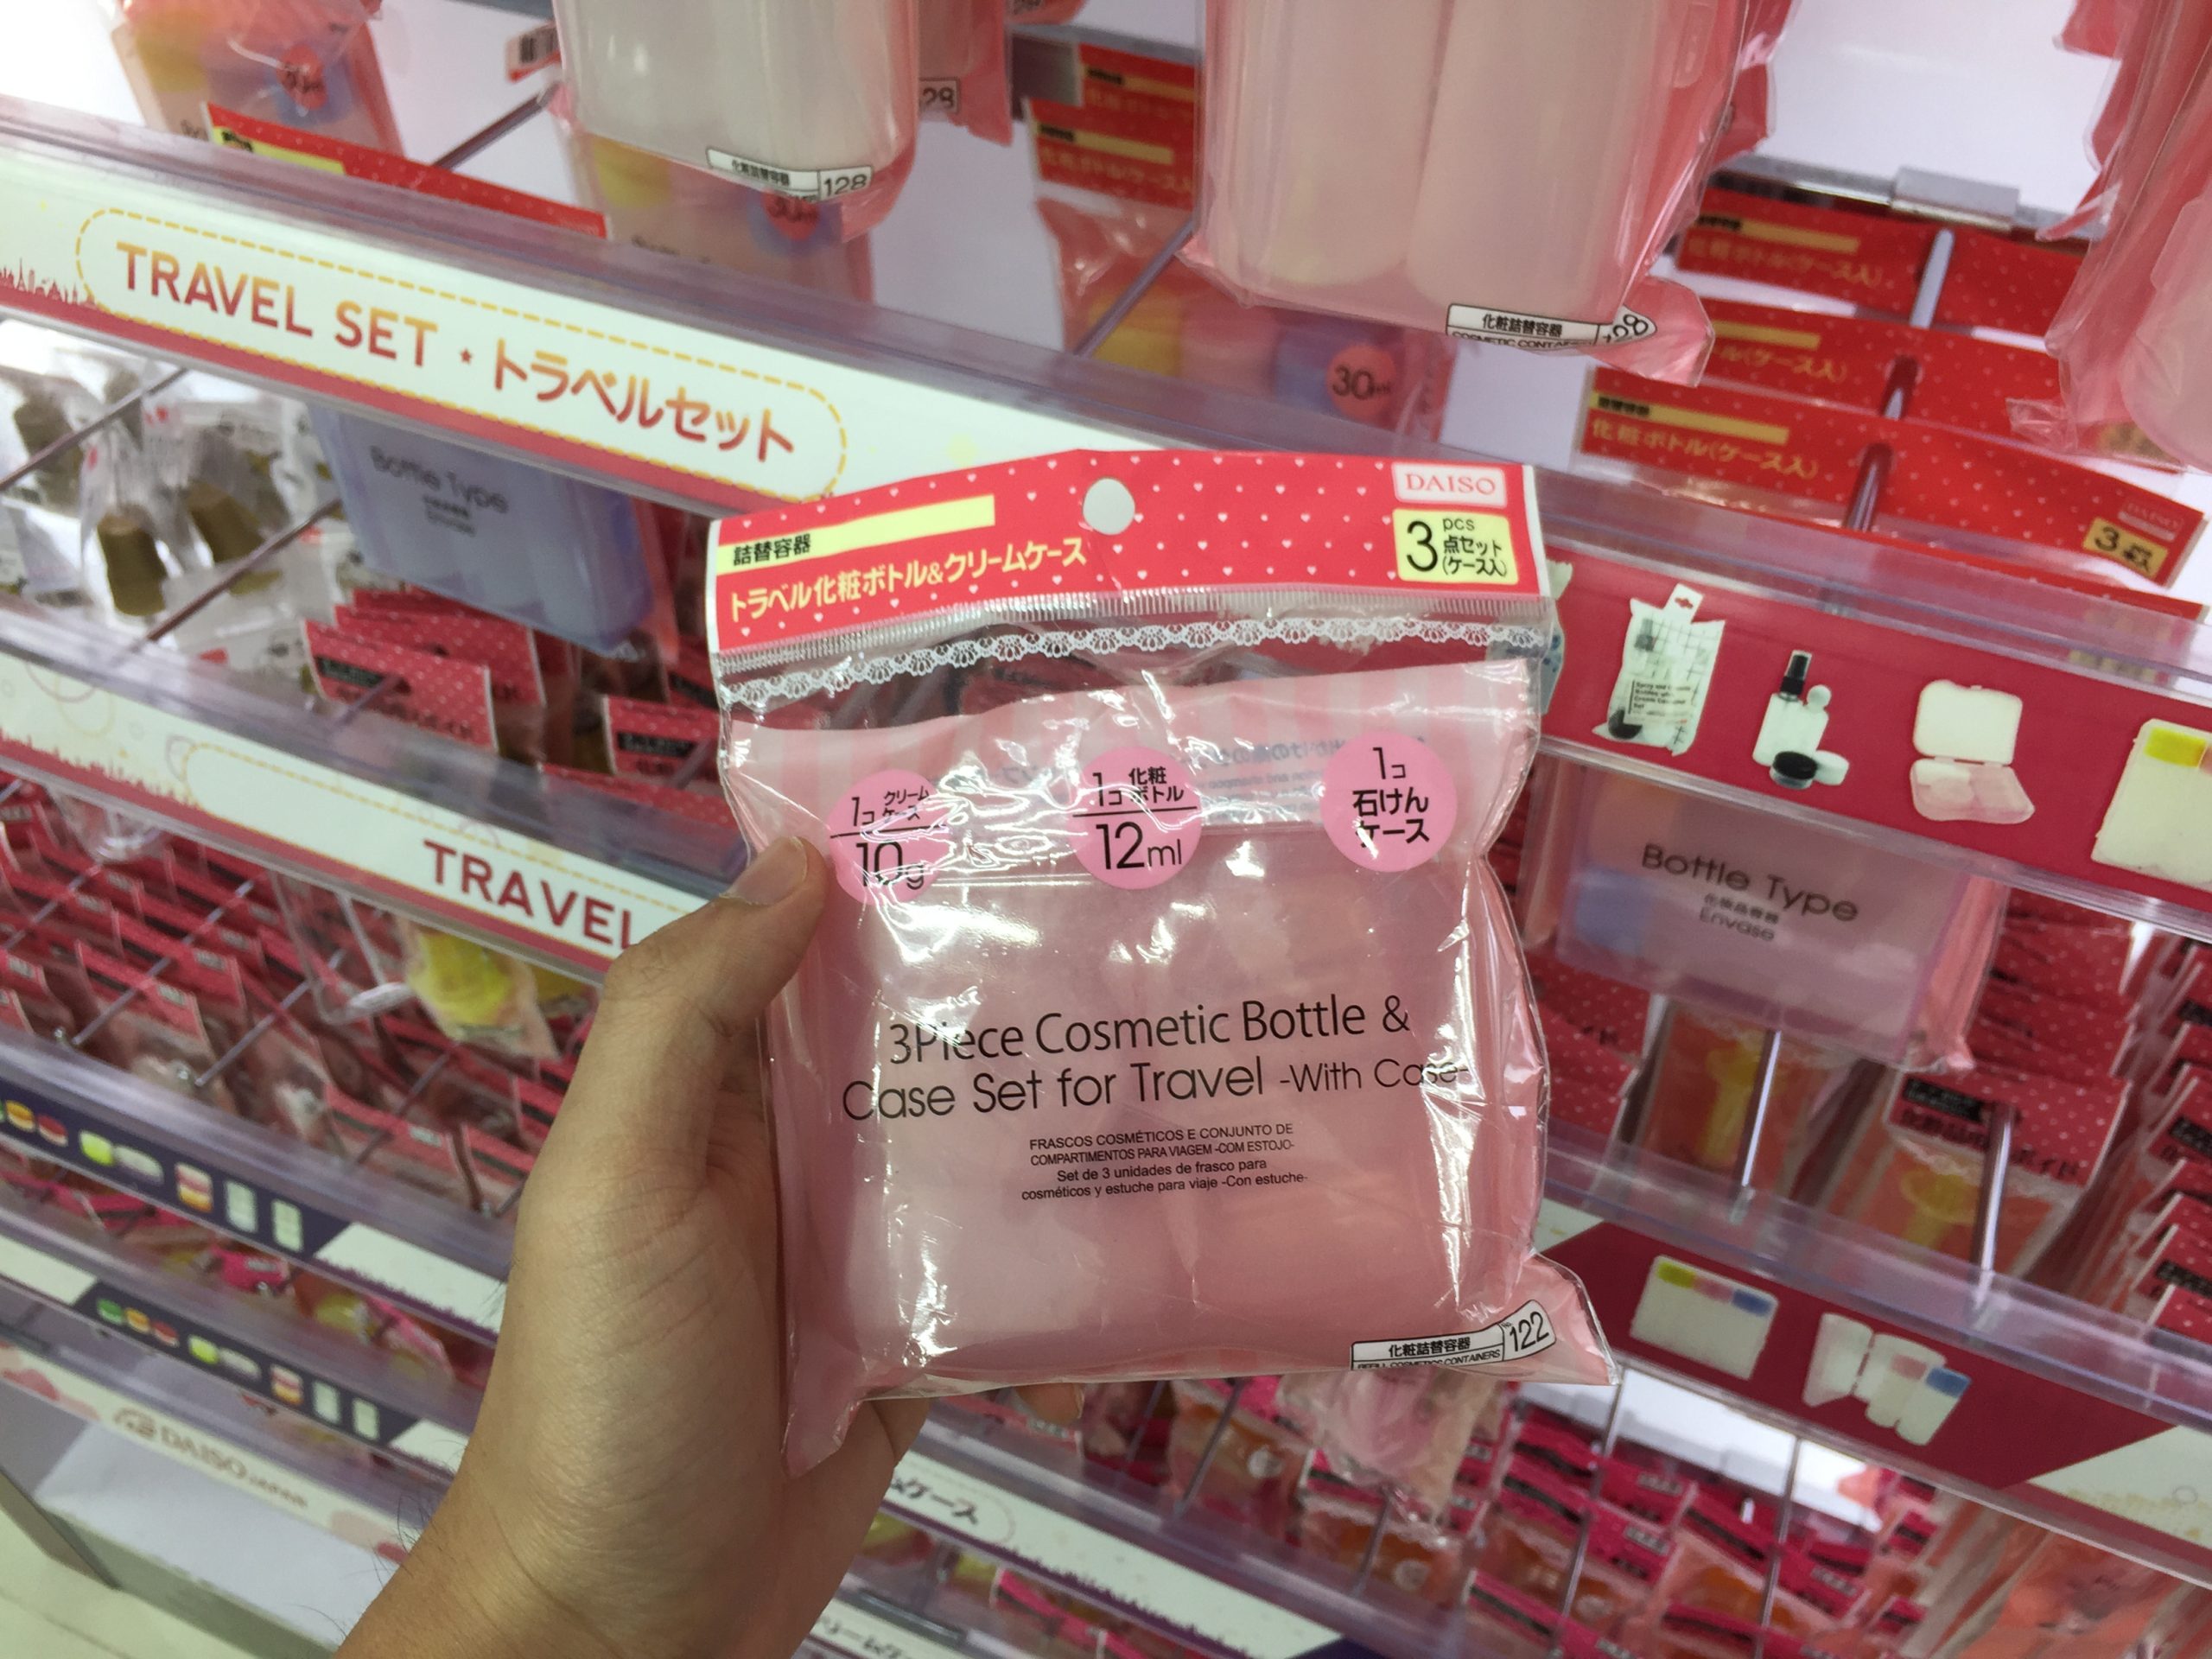 Cosmetic set from Daiso